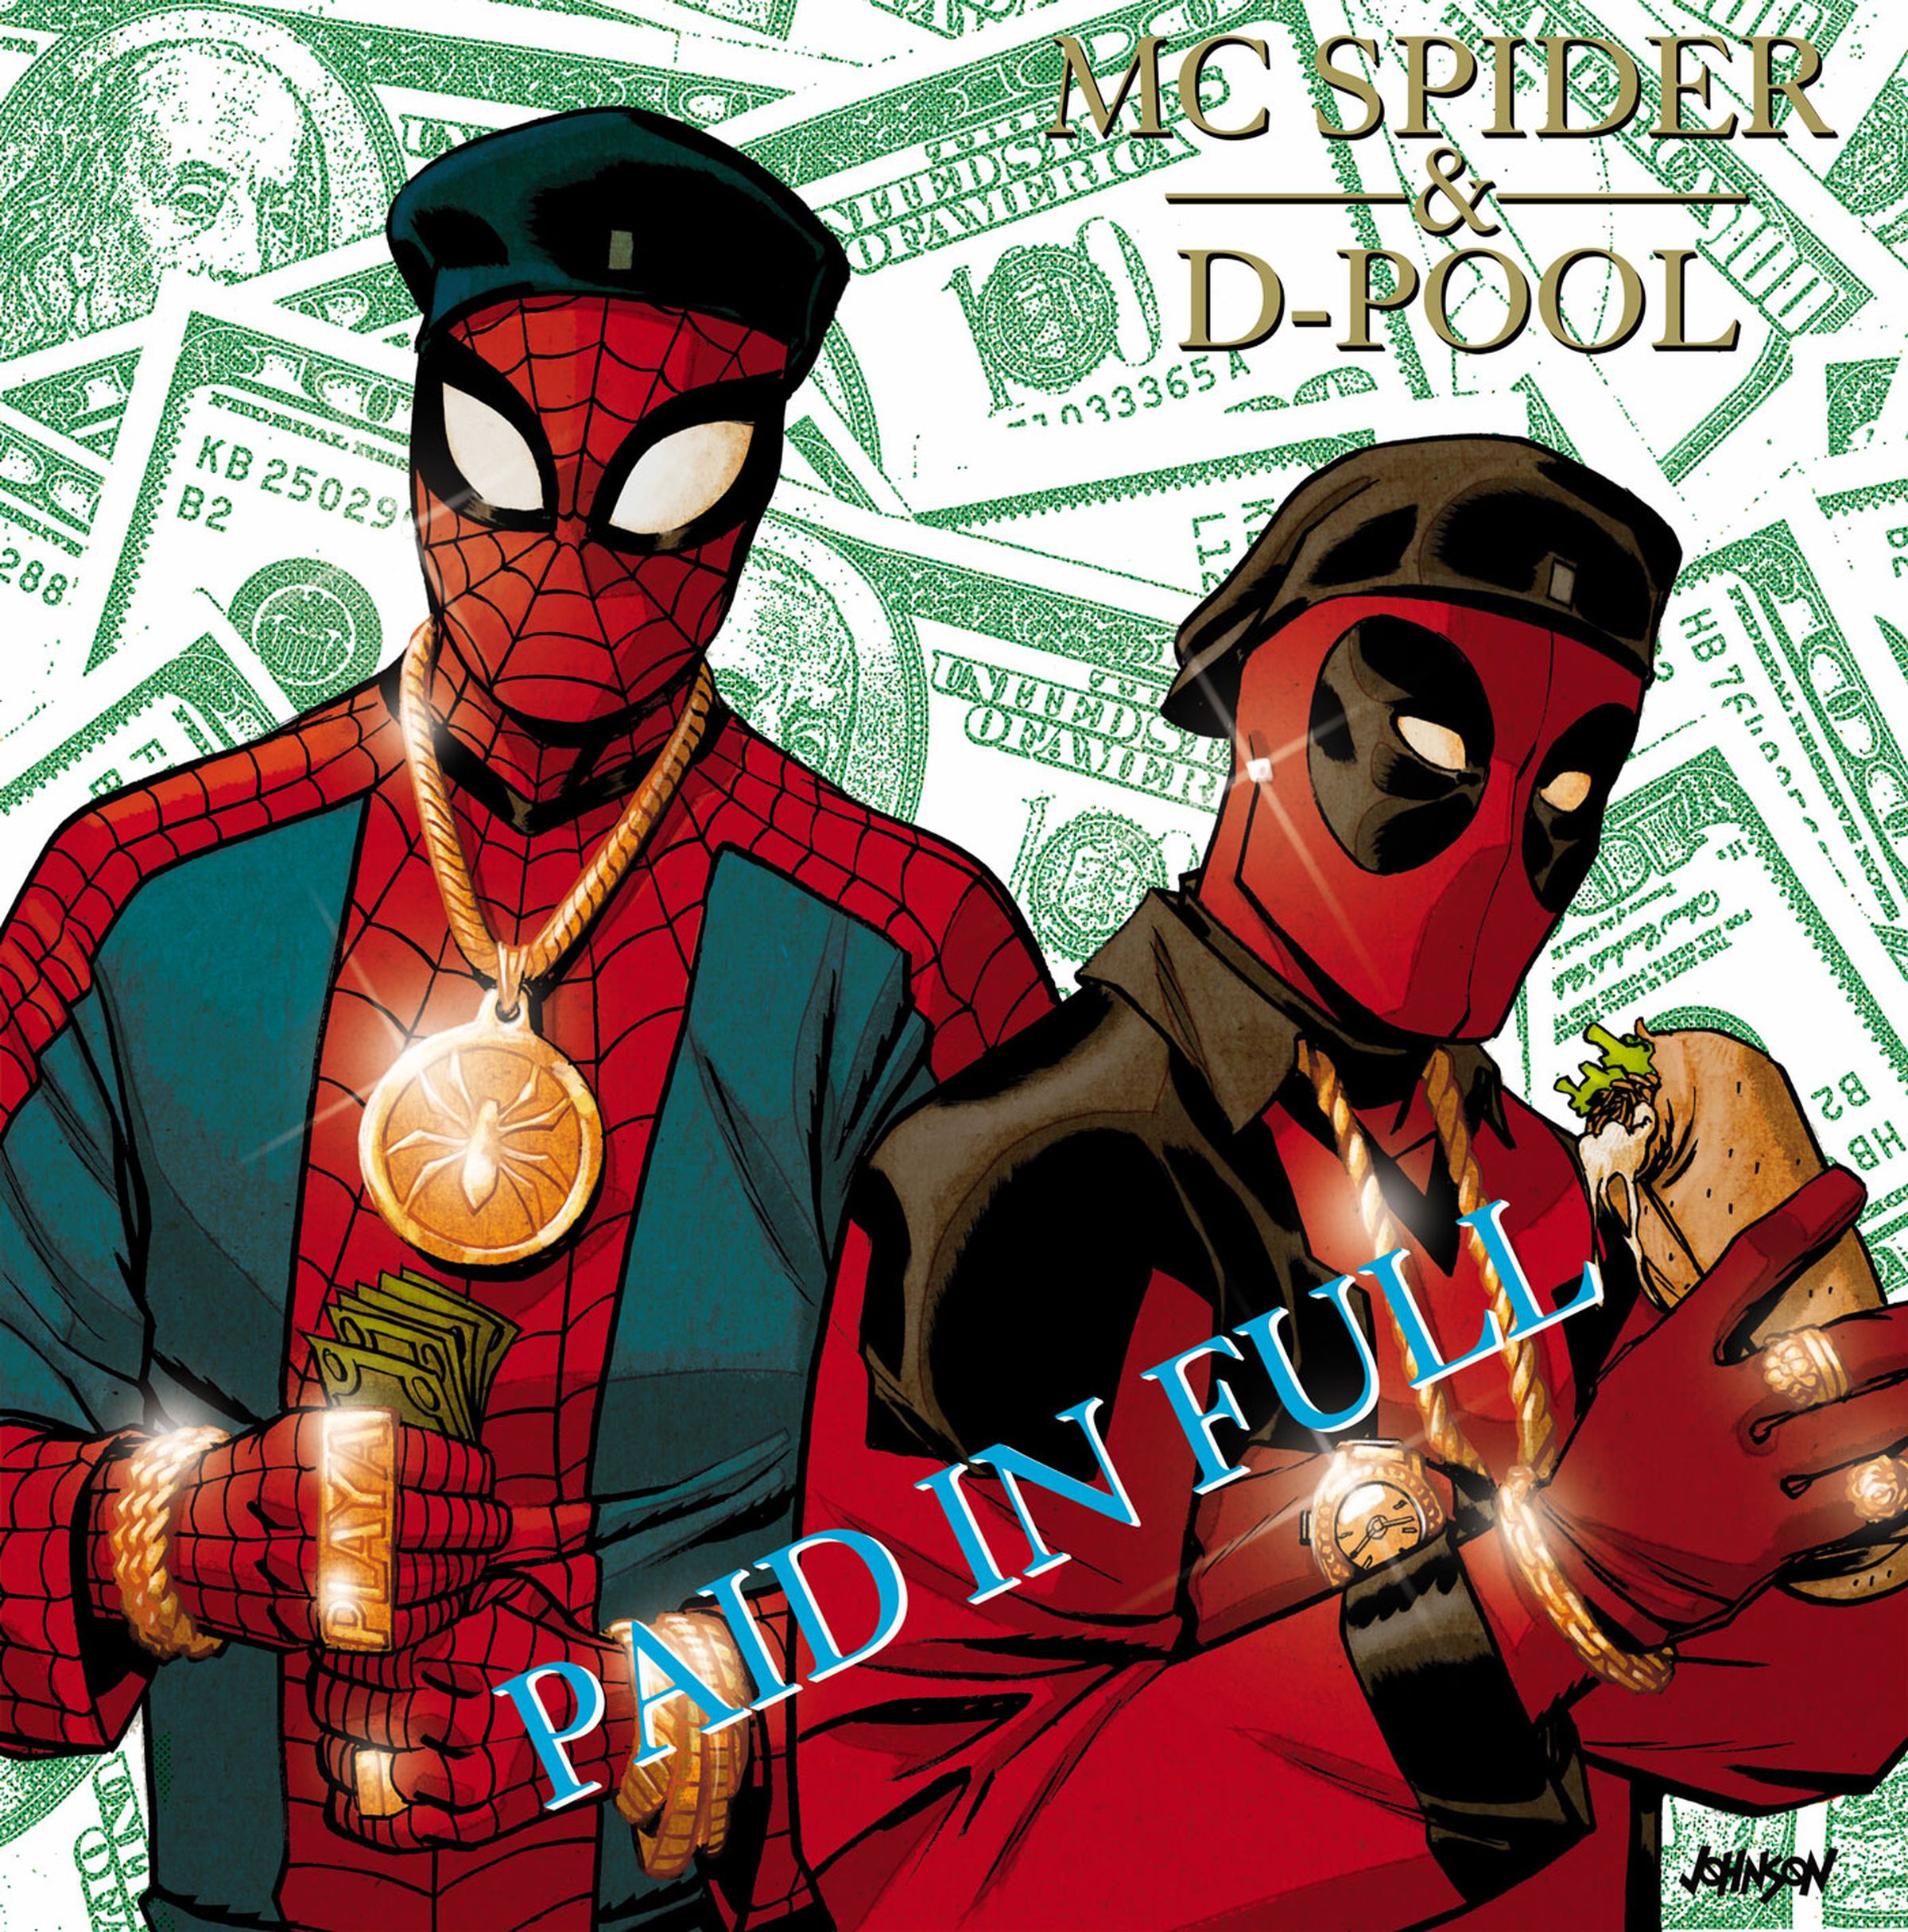 Marvel pays homage to classic hip-hop